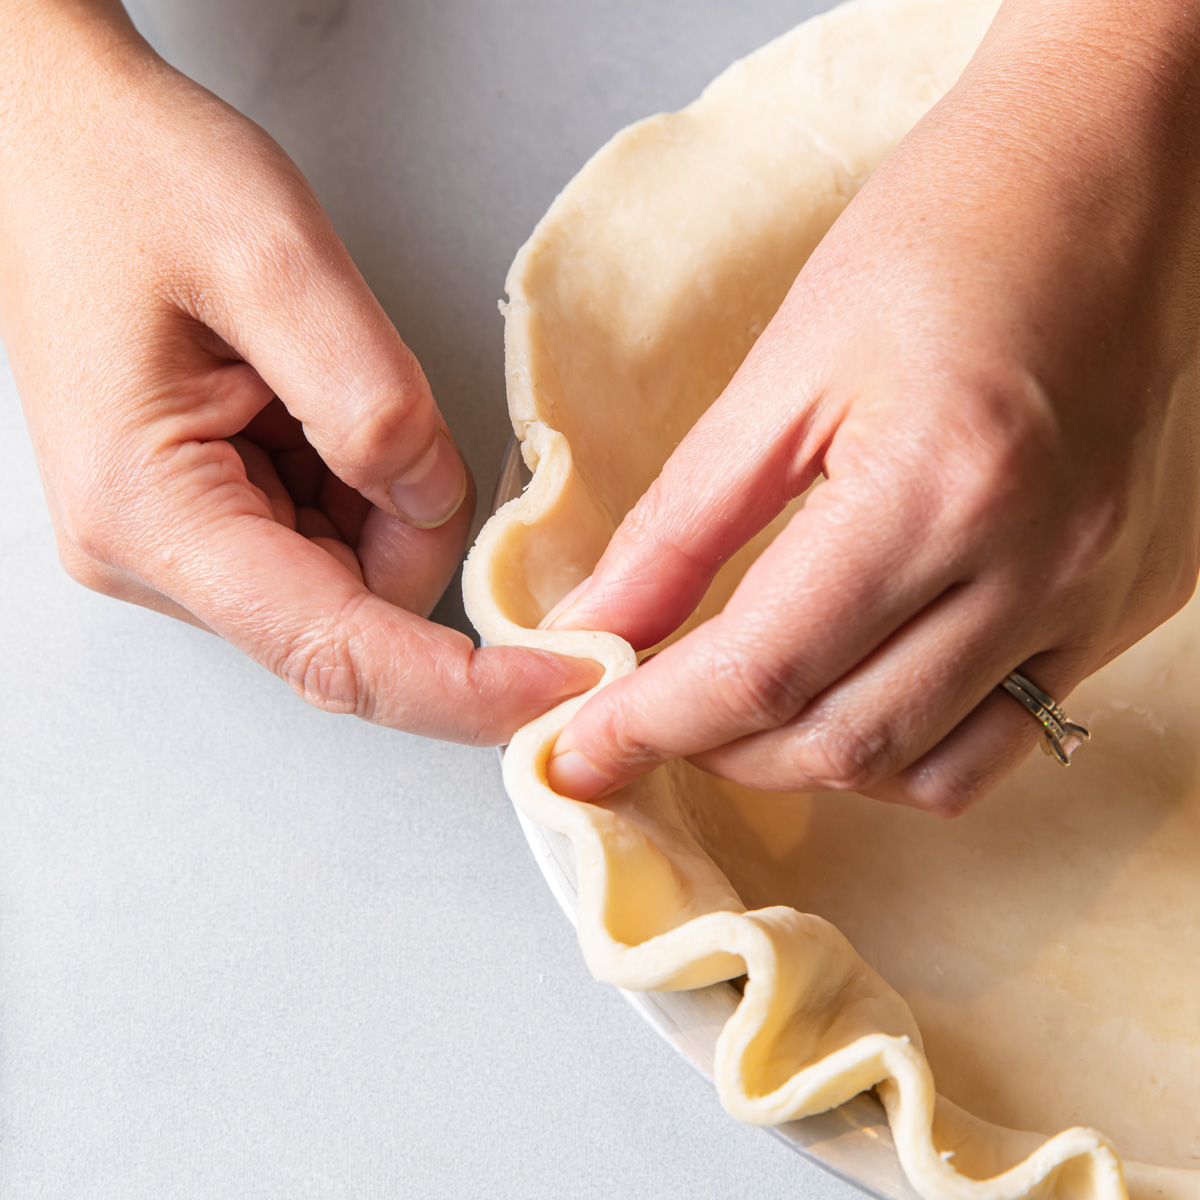 Crimping the edge of a pie crust